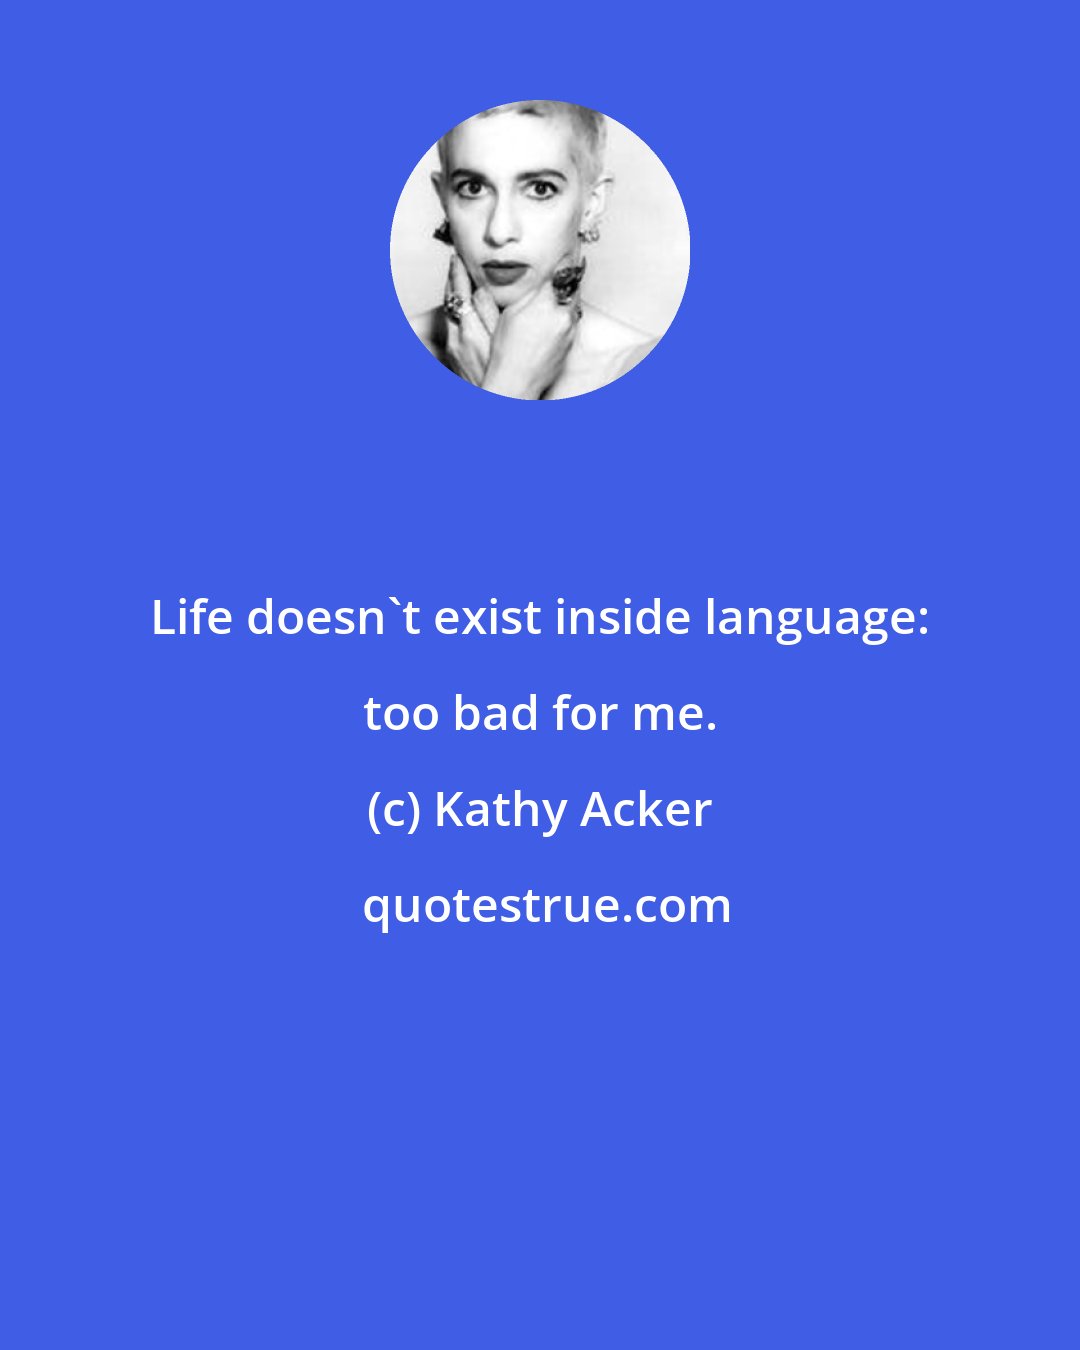 Kathy Acker: Life doesn't exist inside language: too bad for me.